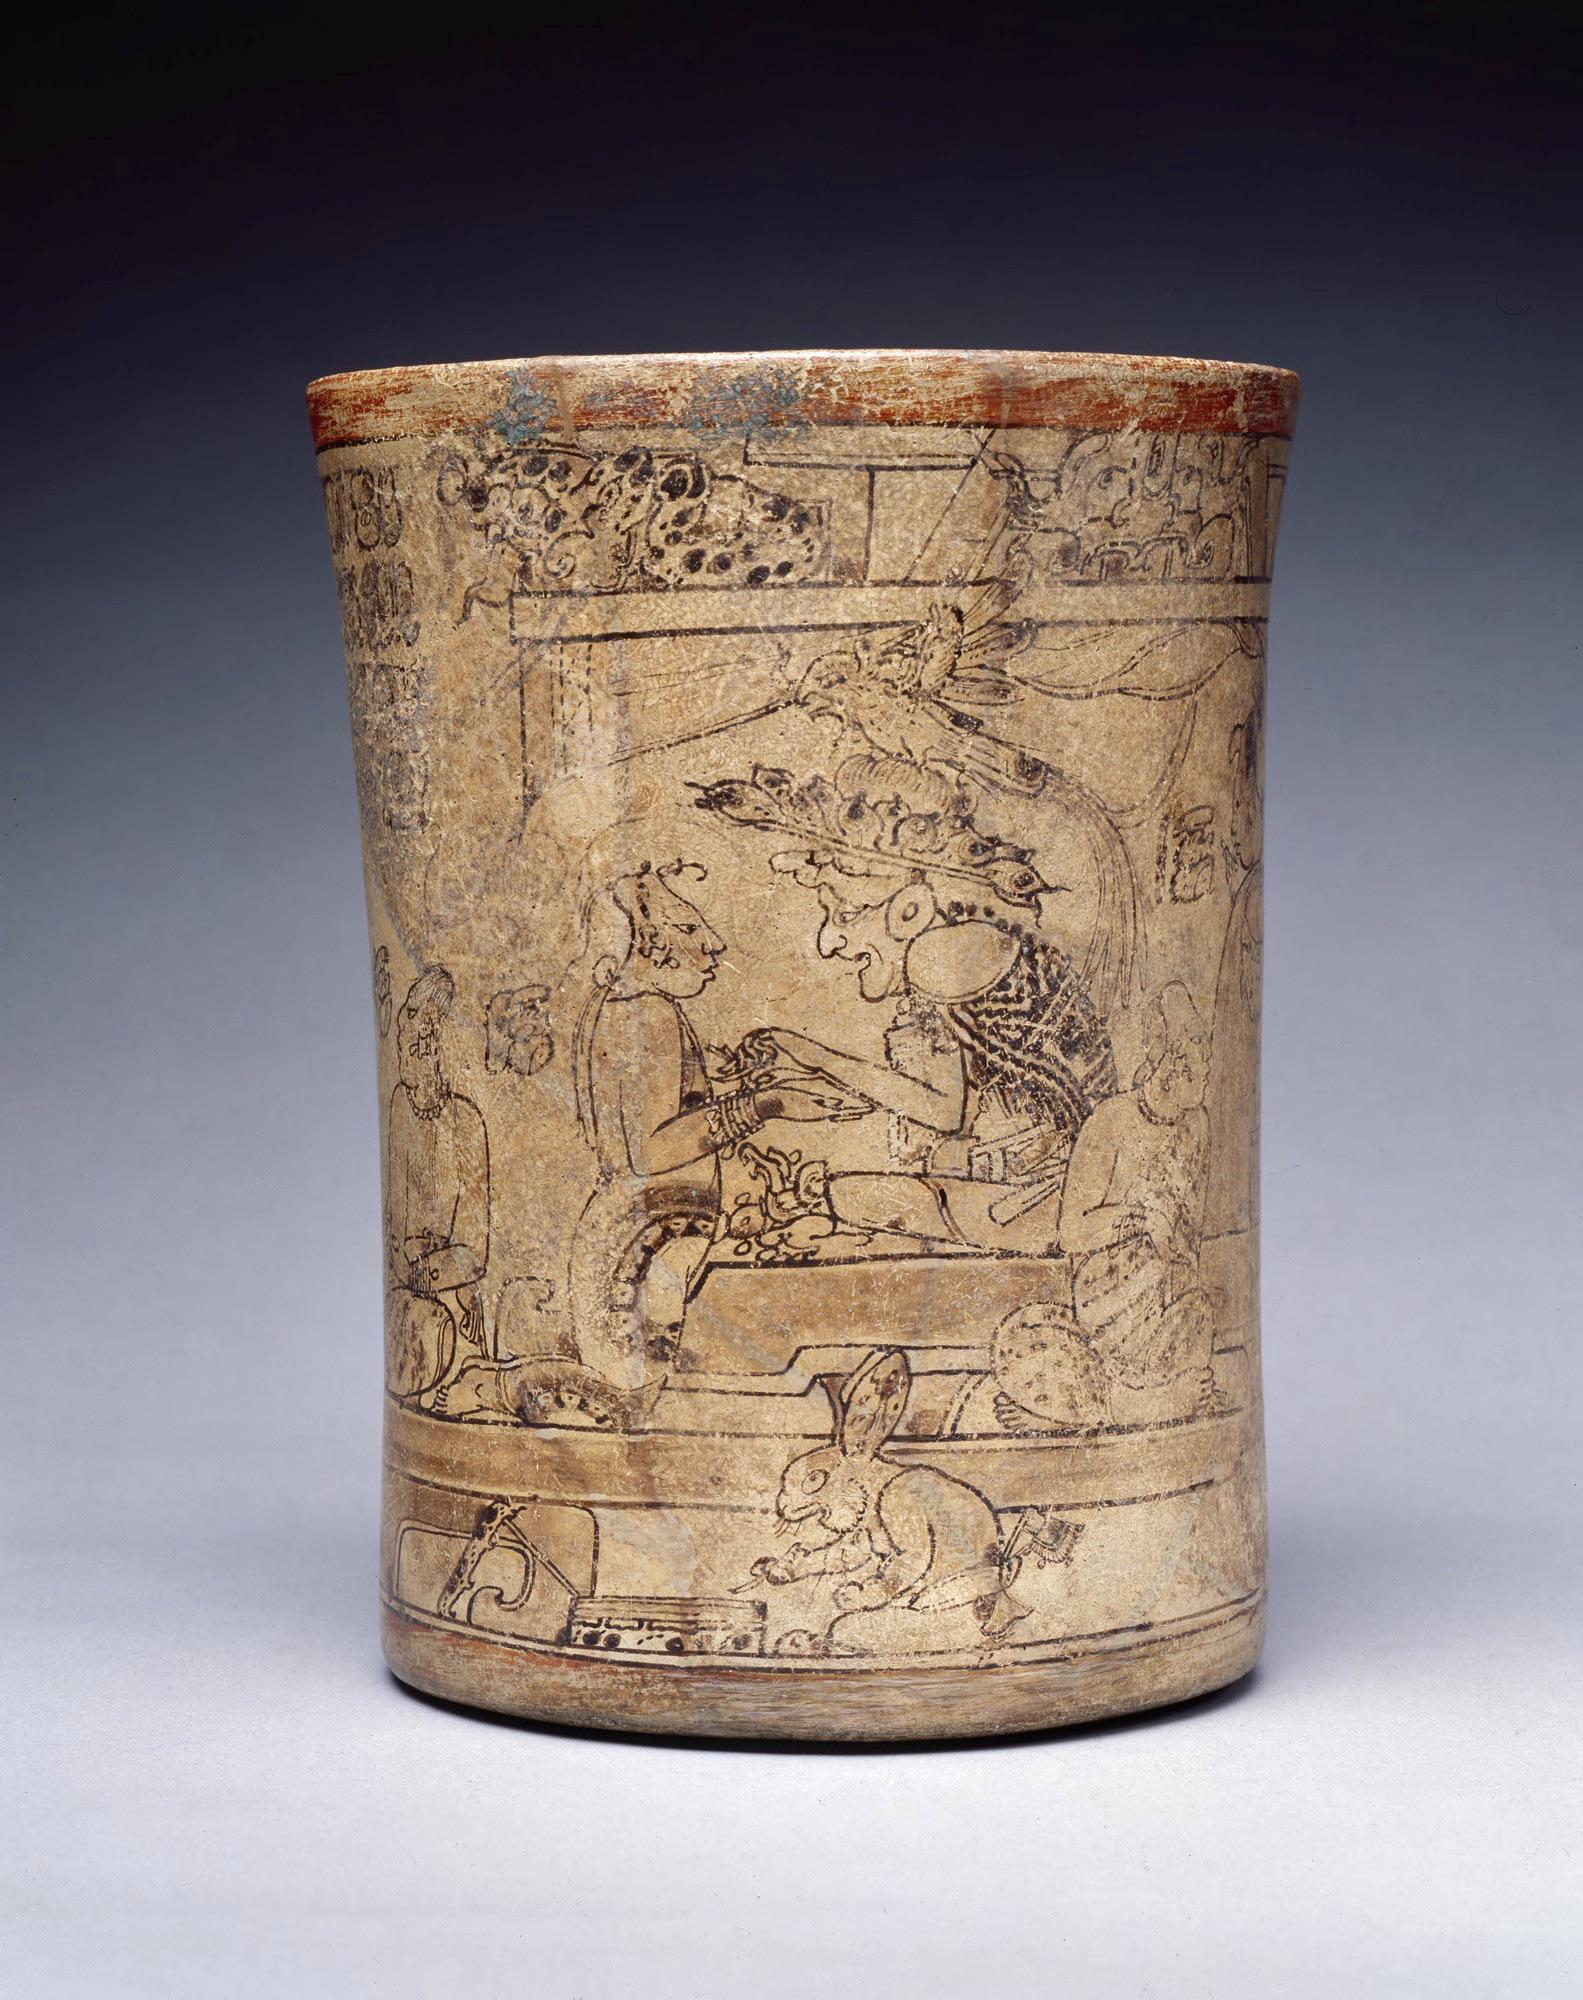 The Princeton Vase, a vessel utilized in the drinking of chocolate. A mythological scene centered around God L in his palace. Classic Maya, 670-750 CE.jpg